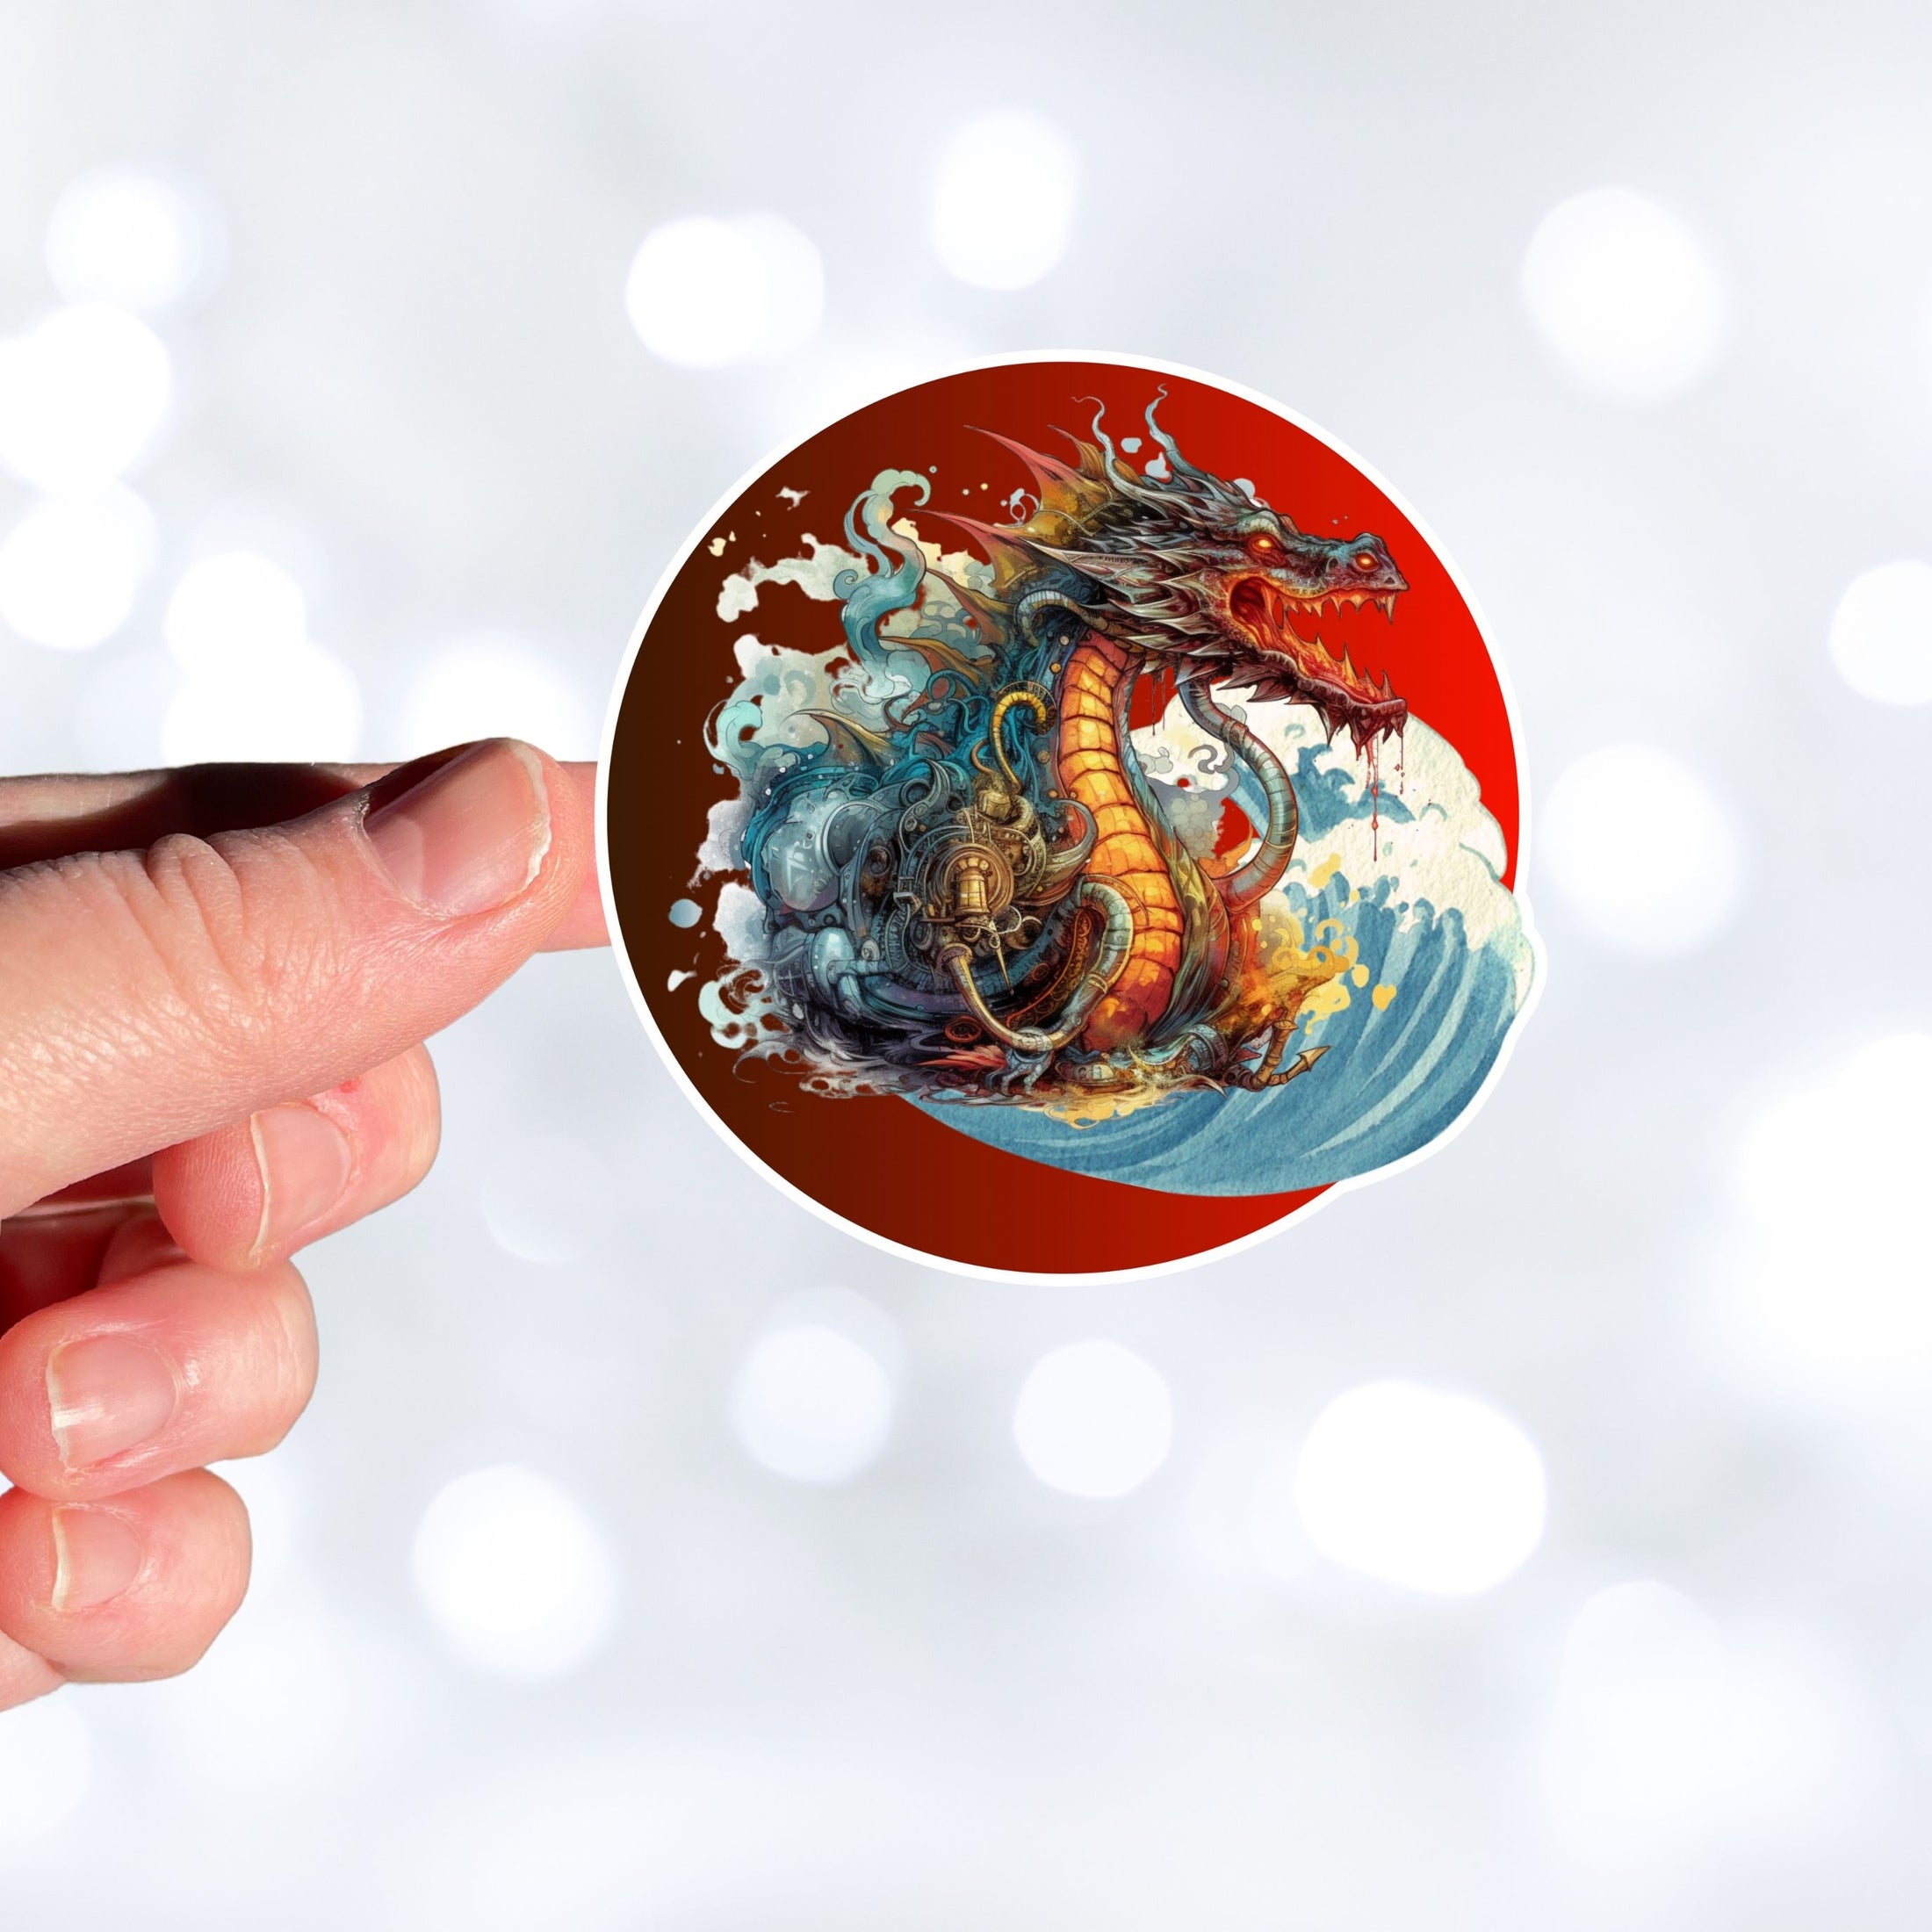 This image shows a hand holding the steampunk Japanese dragon sticker.